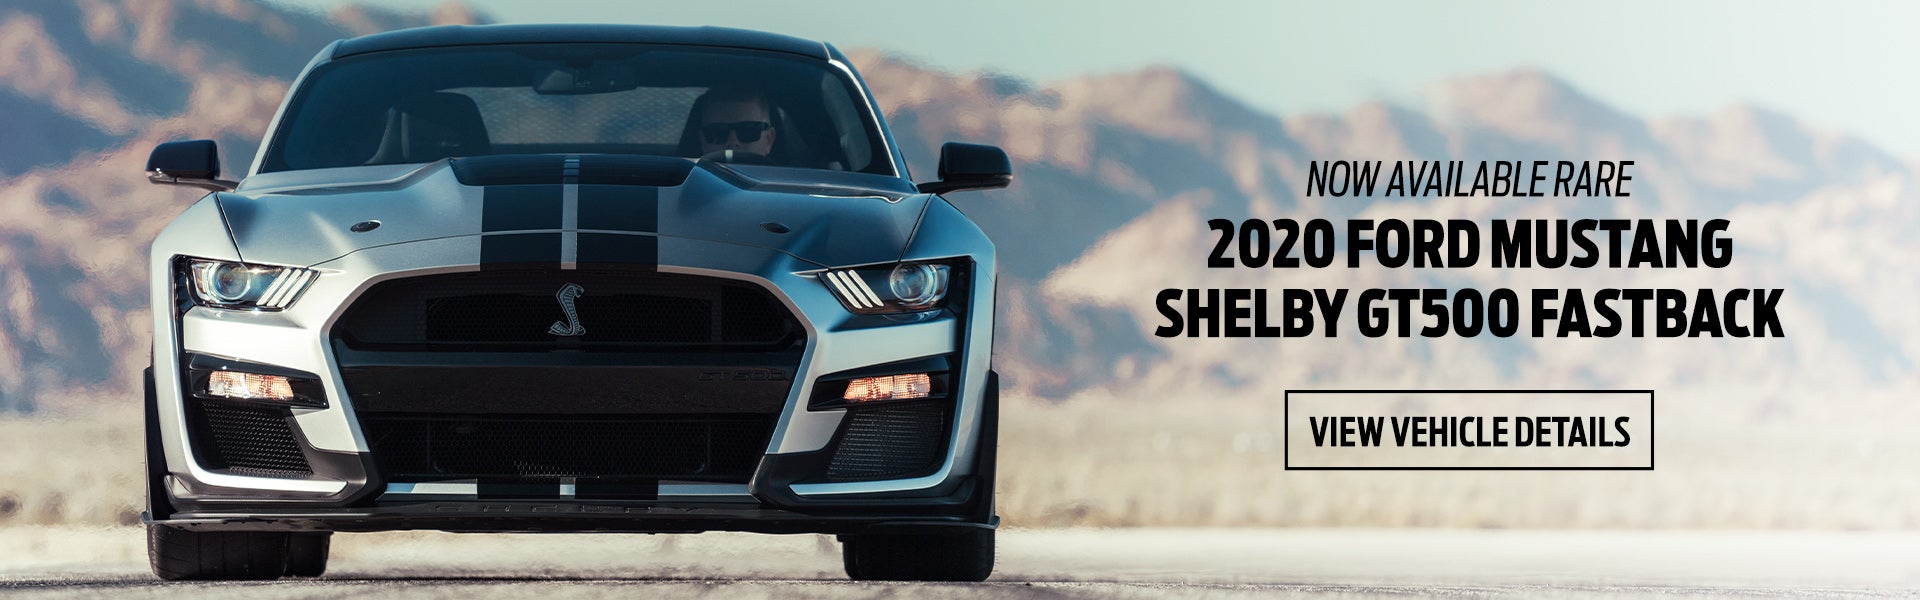 2020 Shelby GT500 Fastback